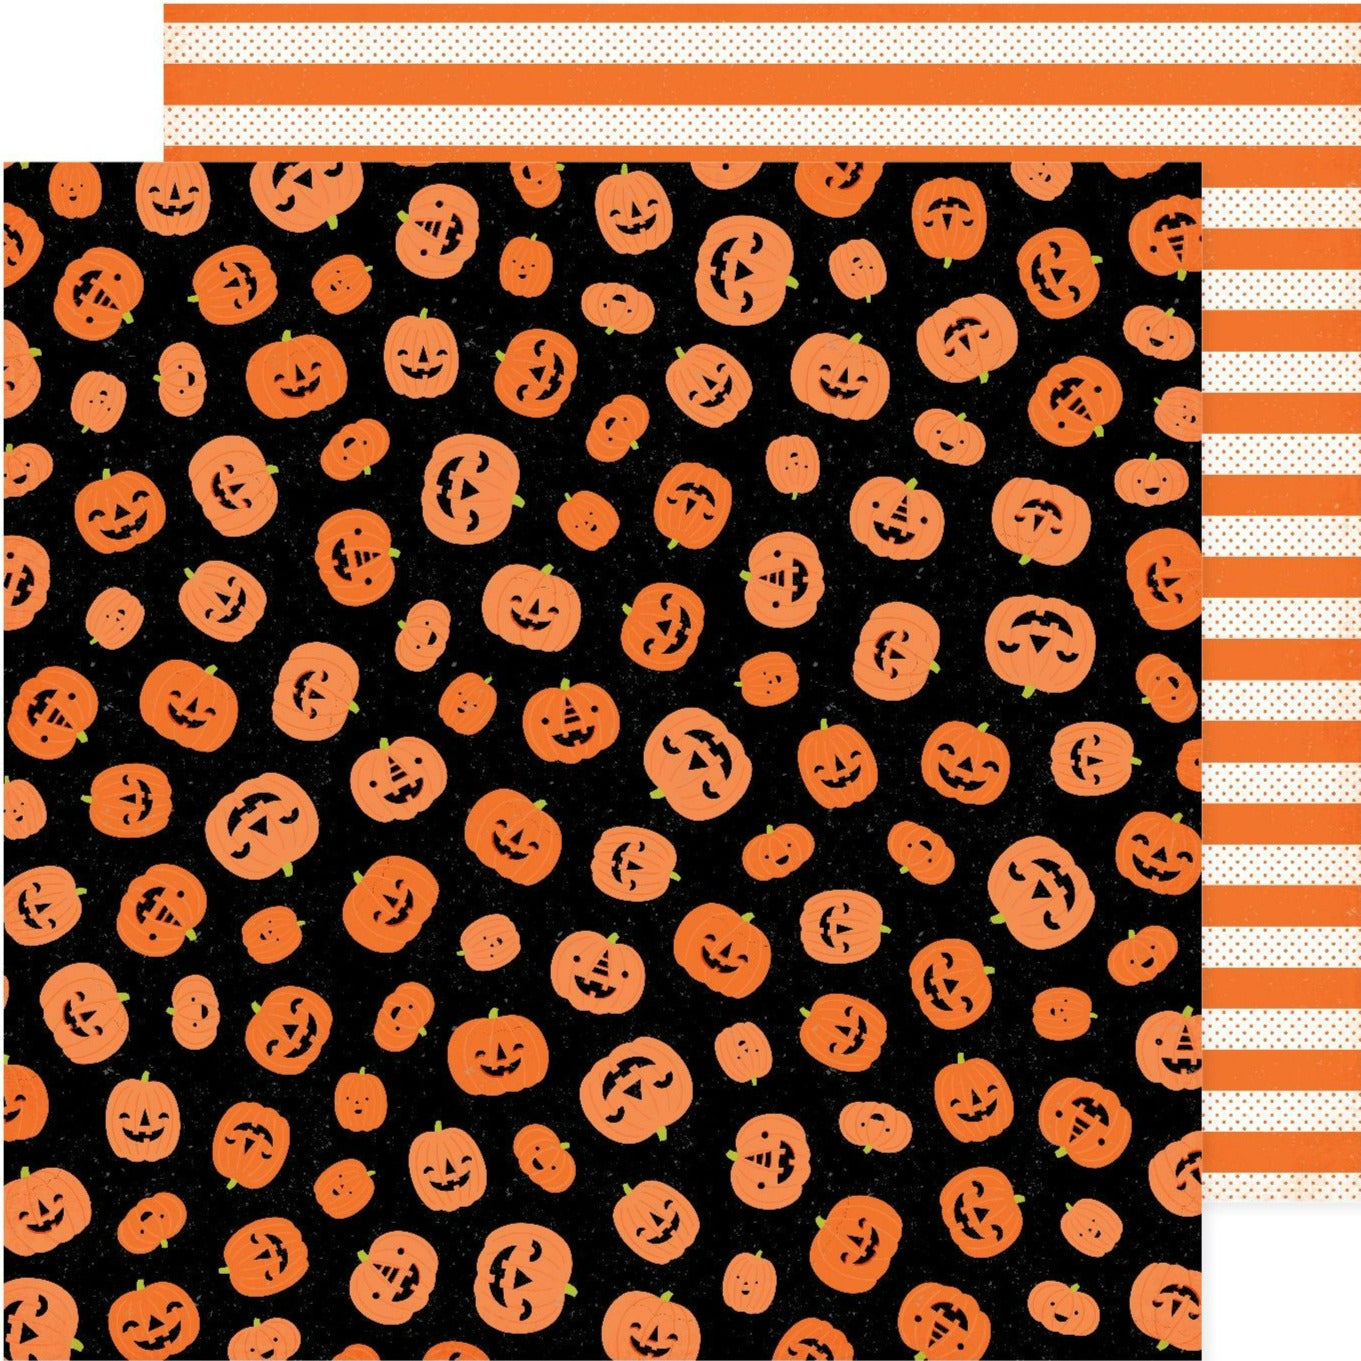 (smiling orange pumpkins on a black background - orange and white stripes reverse) - on double-sided 12x12 cardstock. From American Crafts.